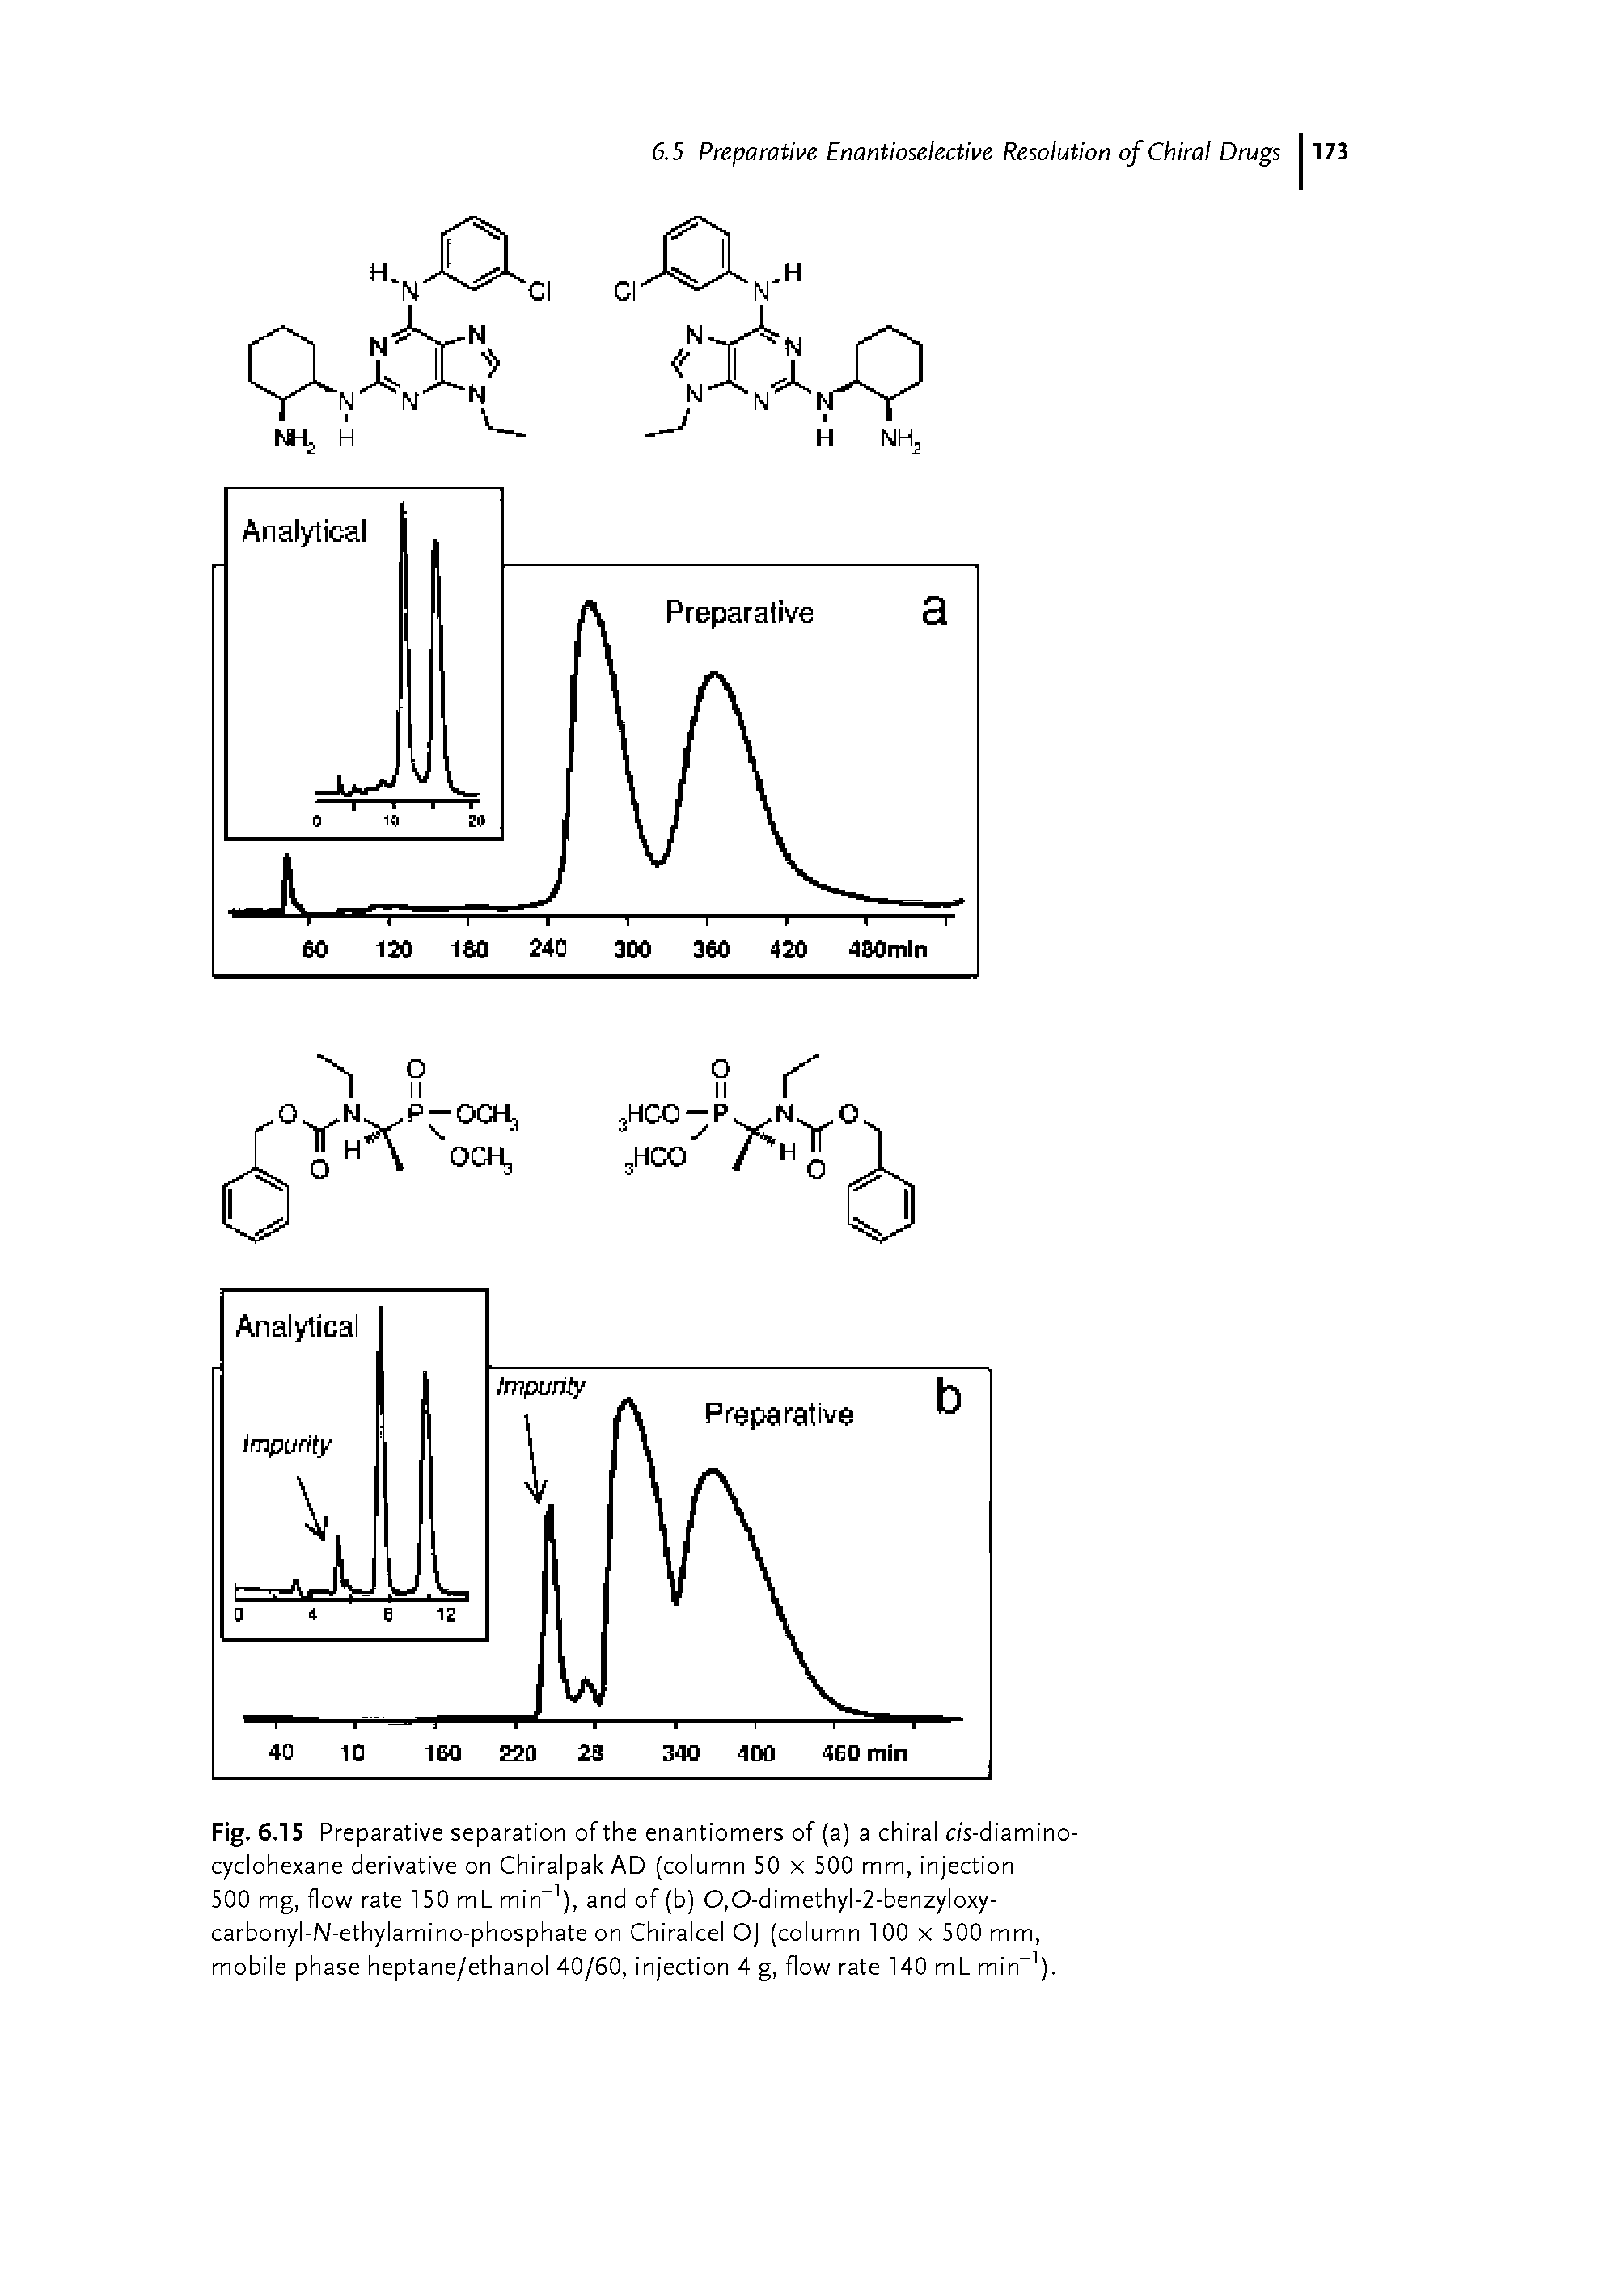 Fig. 6.15 P reparative separation of the enantiomers of (a) a chiral c/s-diamino-cyclohexane derivative on Chiralpak AD (column 50 x 500 mm, injection 500 mg, flow rate 150 mL min ), and of (b) 0,0-dimethyl-2-benzyloxy-carbonyl-N-ethylamino-phosphate on Chiralcel OJ (column 100 x 500 mm, mobile phase heptane/ethanol 40/60, injection 4 g, flow rate 140 mL min ).